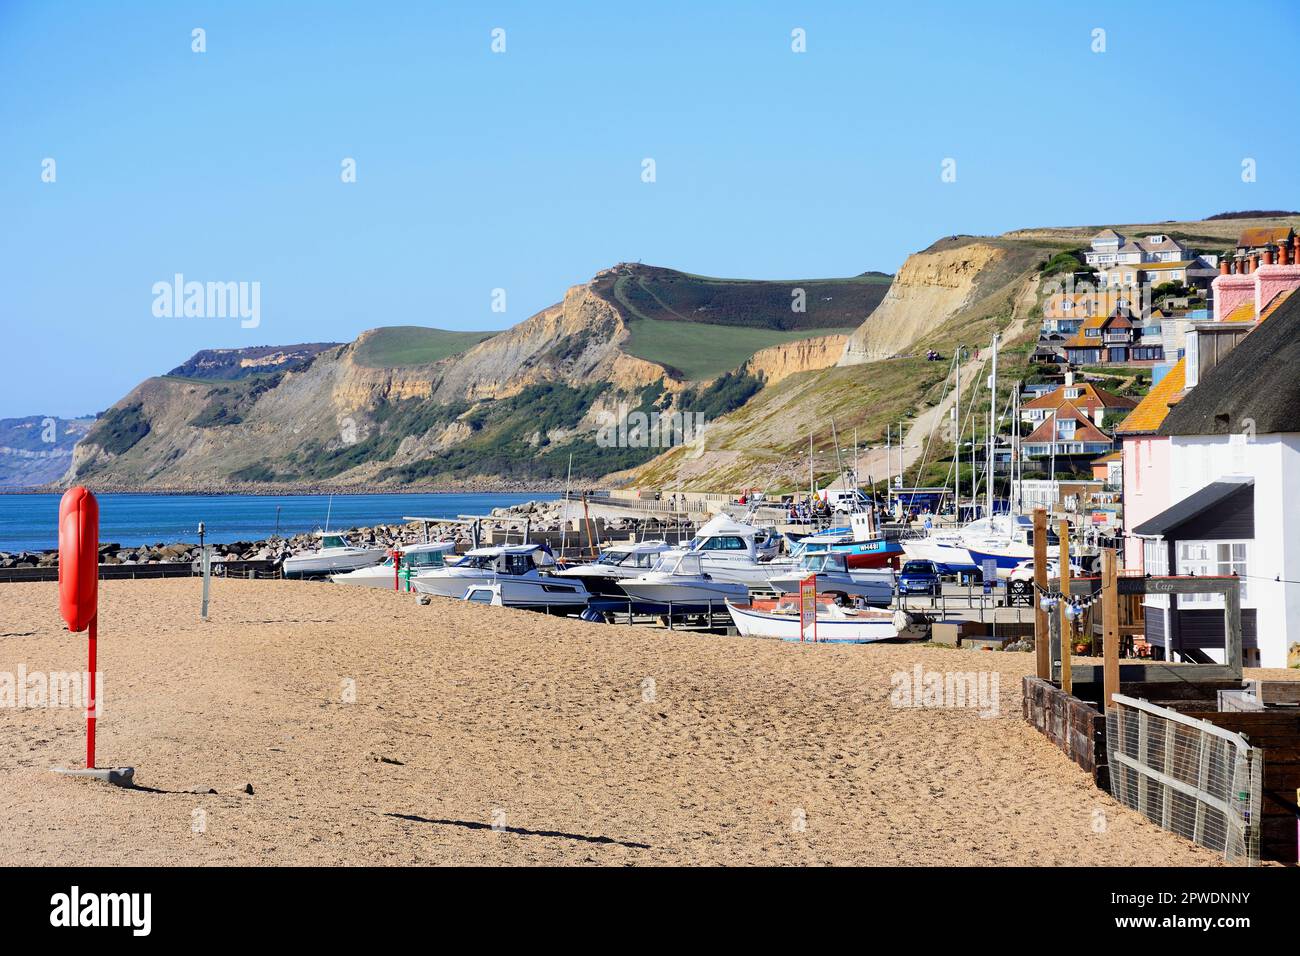 View looking West towards the beach and cliffs with boats in dry dock in the foreground, West Bay, Dorset, UK, Europe. Stock Photo